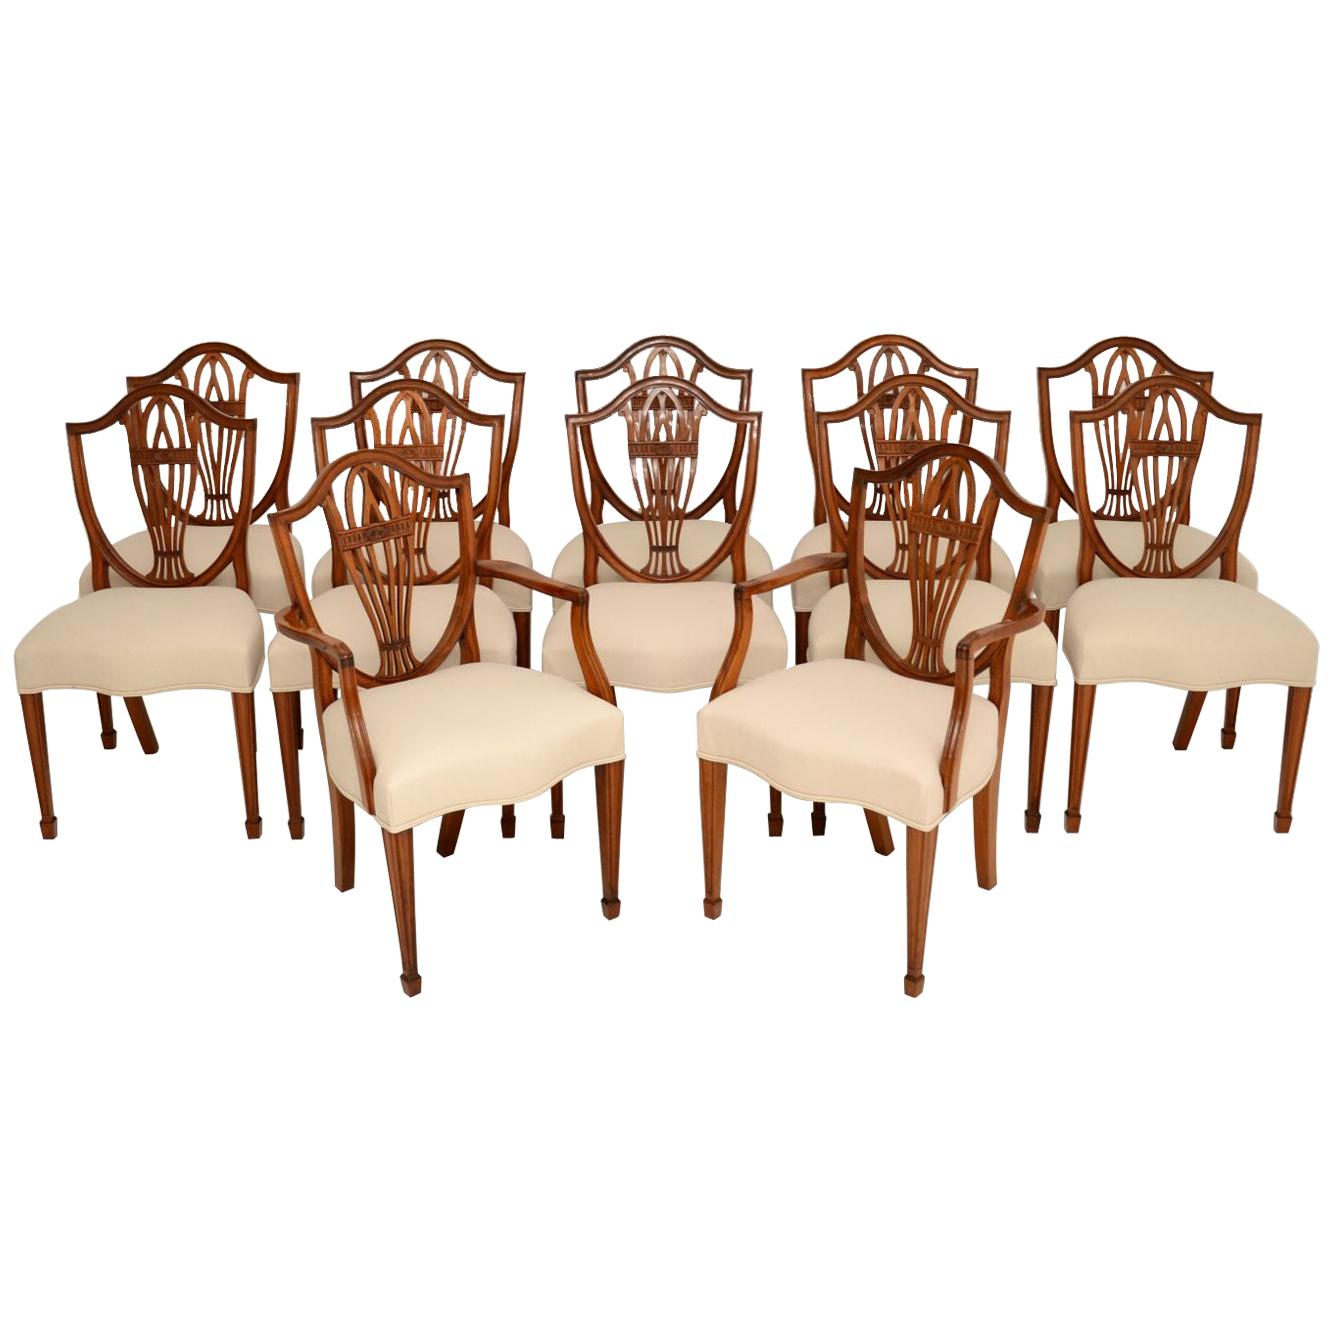 Set of 12 Antique Sheraton Style Shield Back Dining Chairs